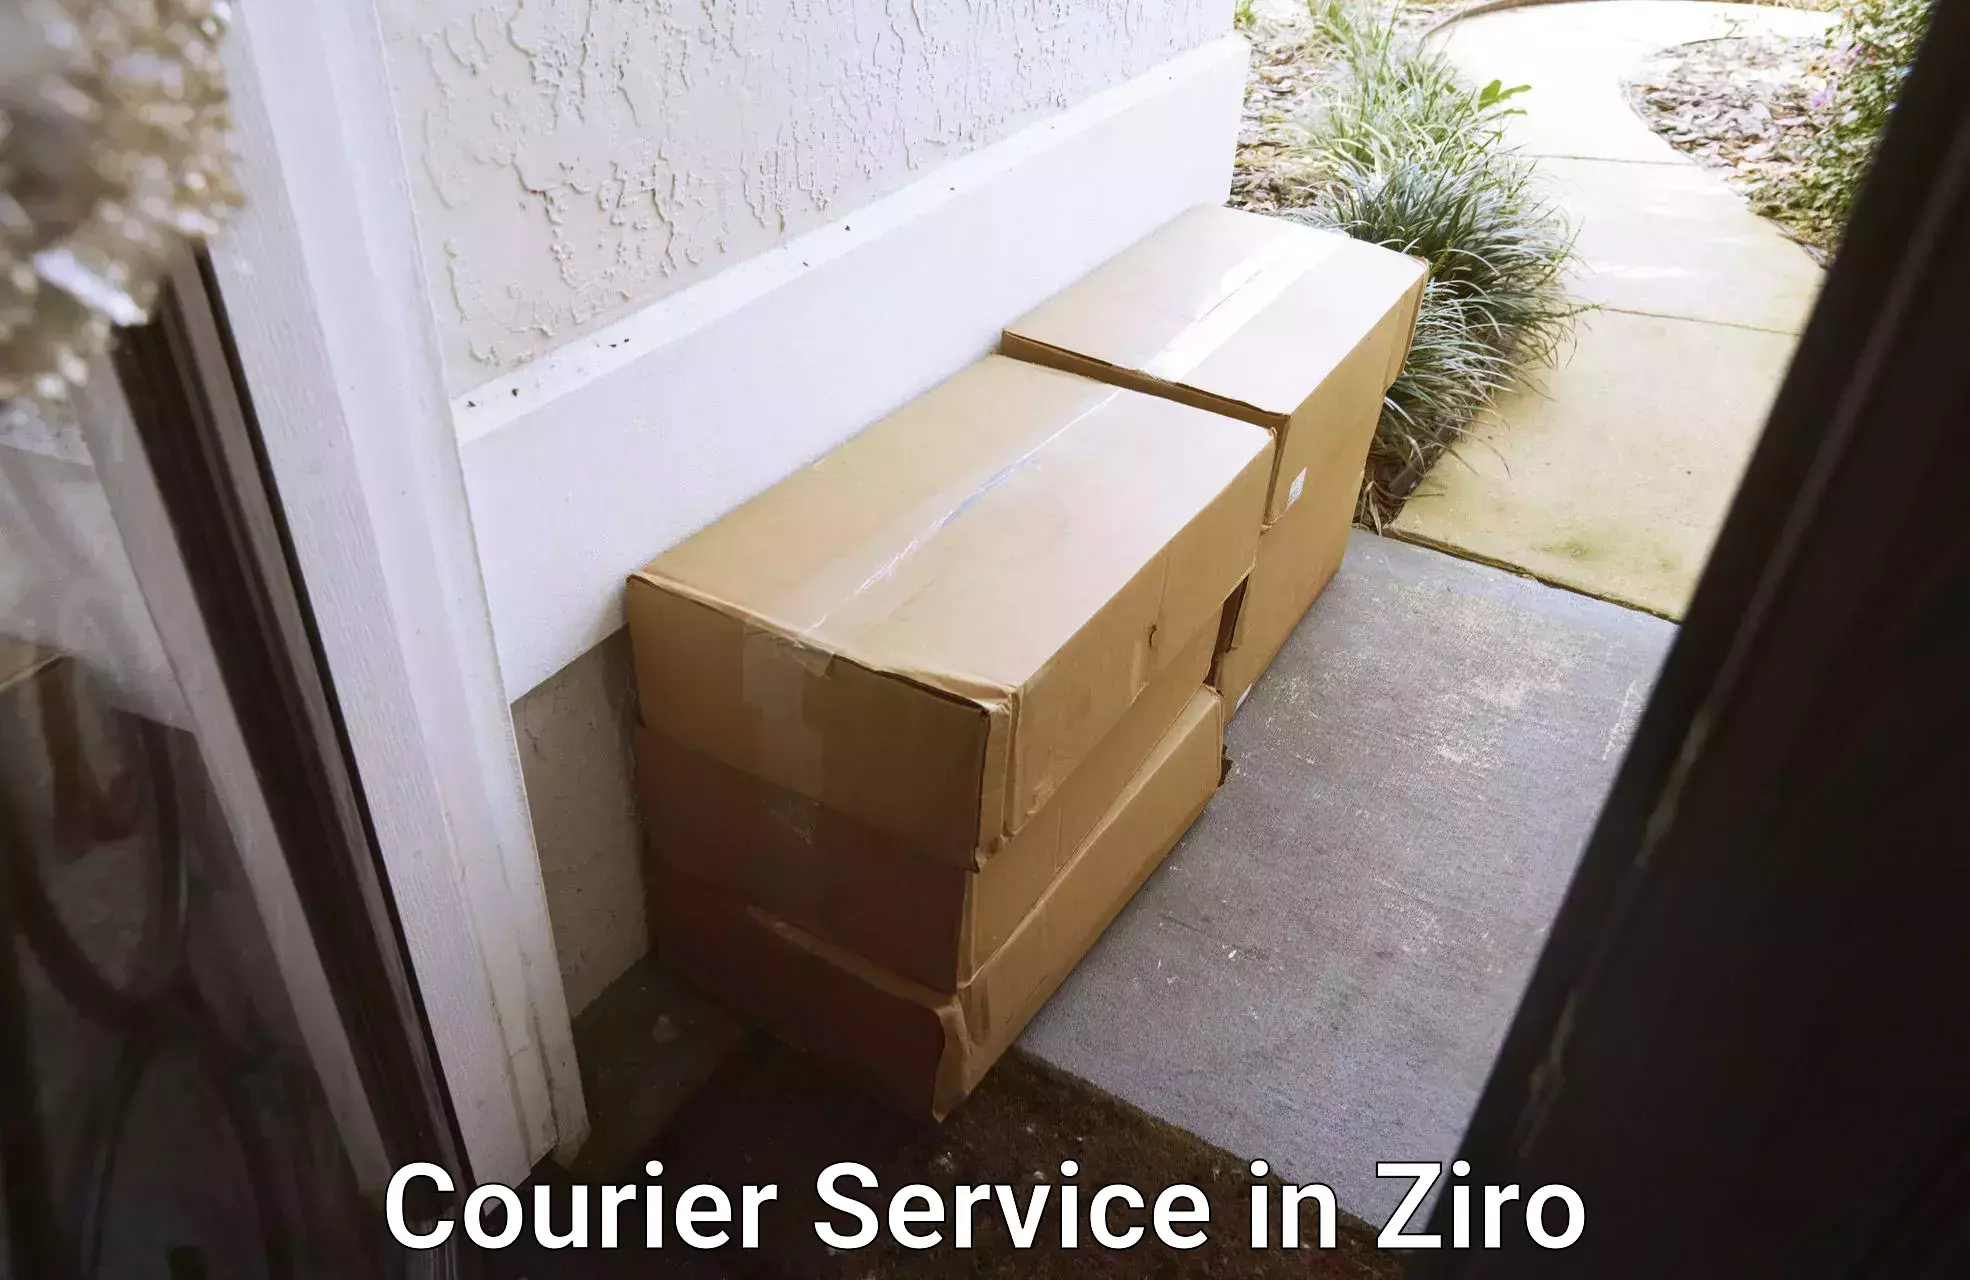 Secure package delivery in Ziro